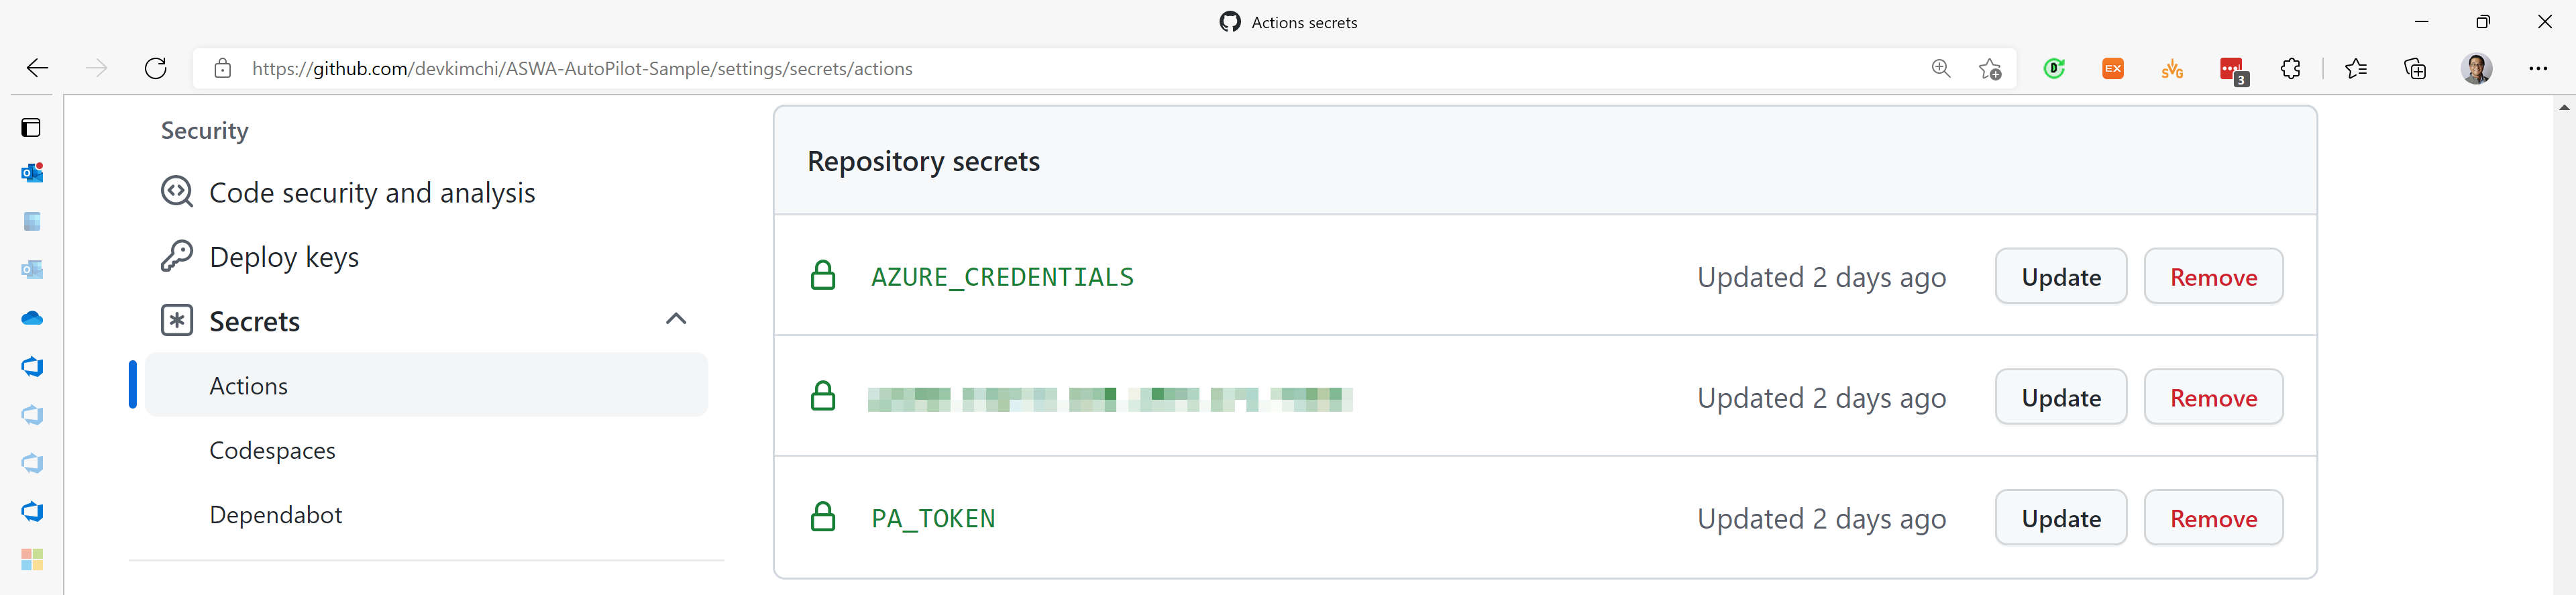 GitHub Actions Secrets – Azure Credentials and GitHub PAT